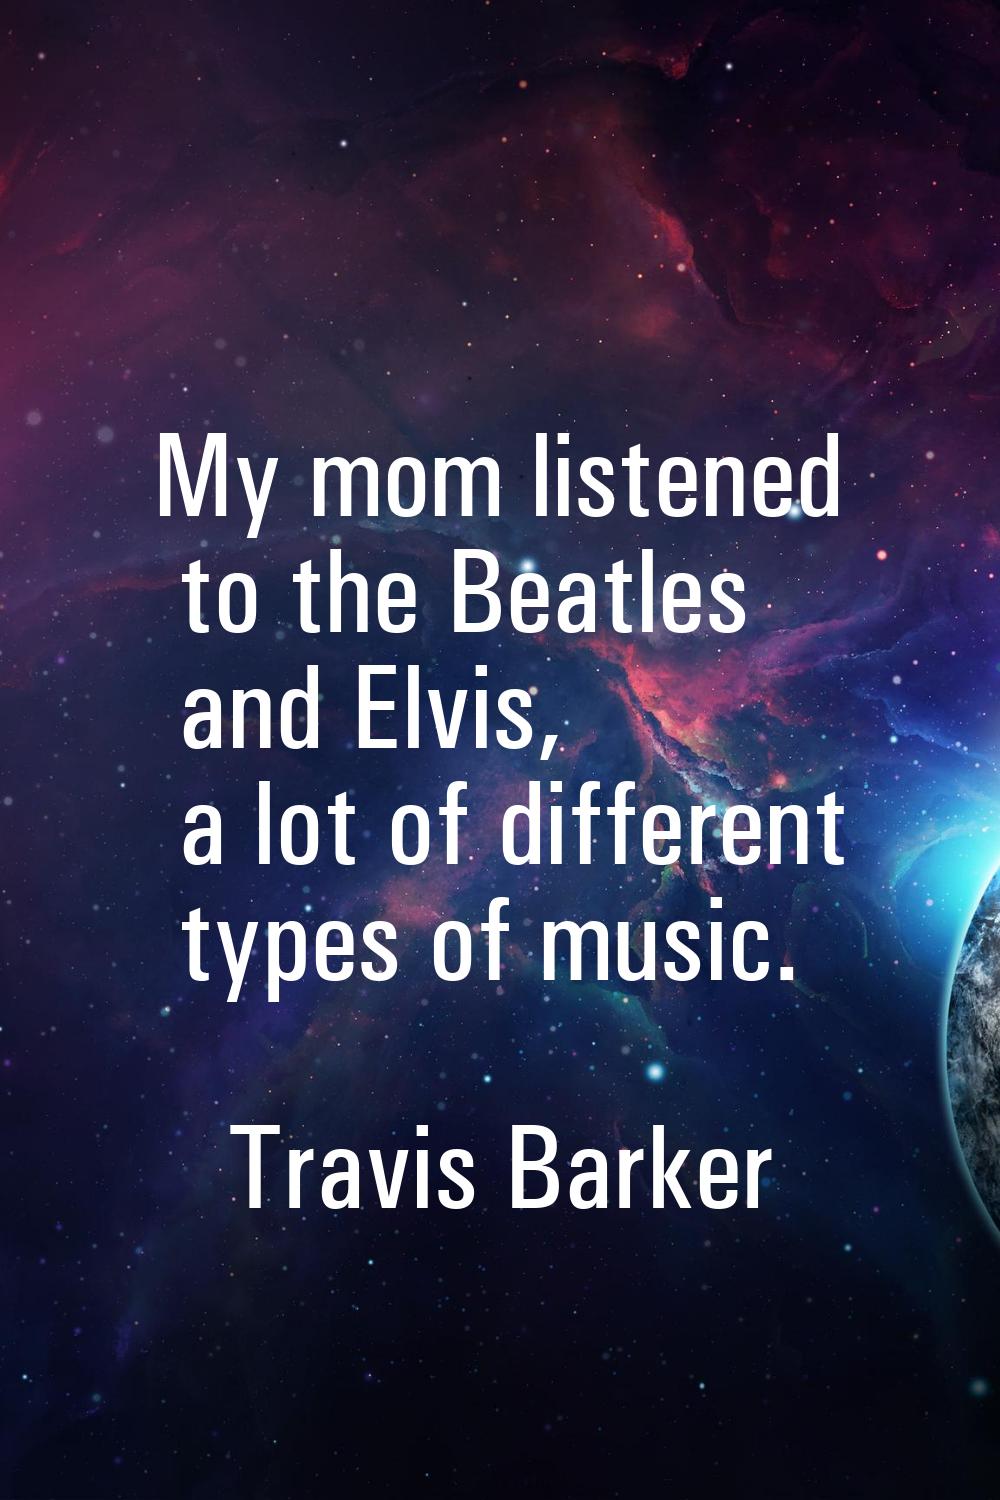 My mom listened to the Beatles and Elvis, a lot of different types of music.